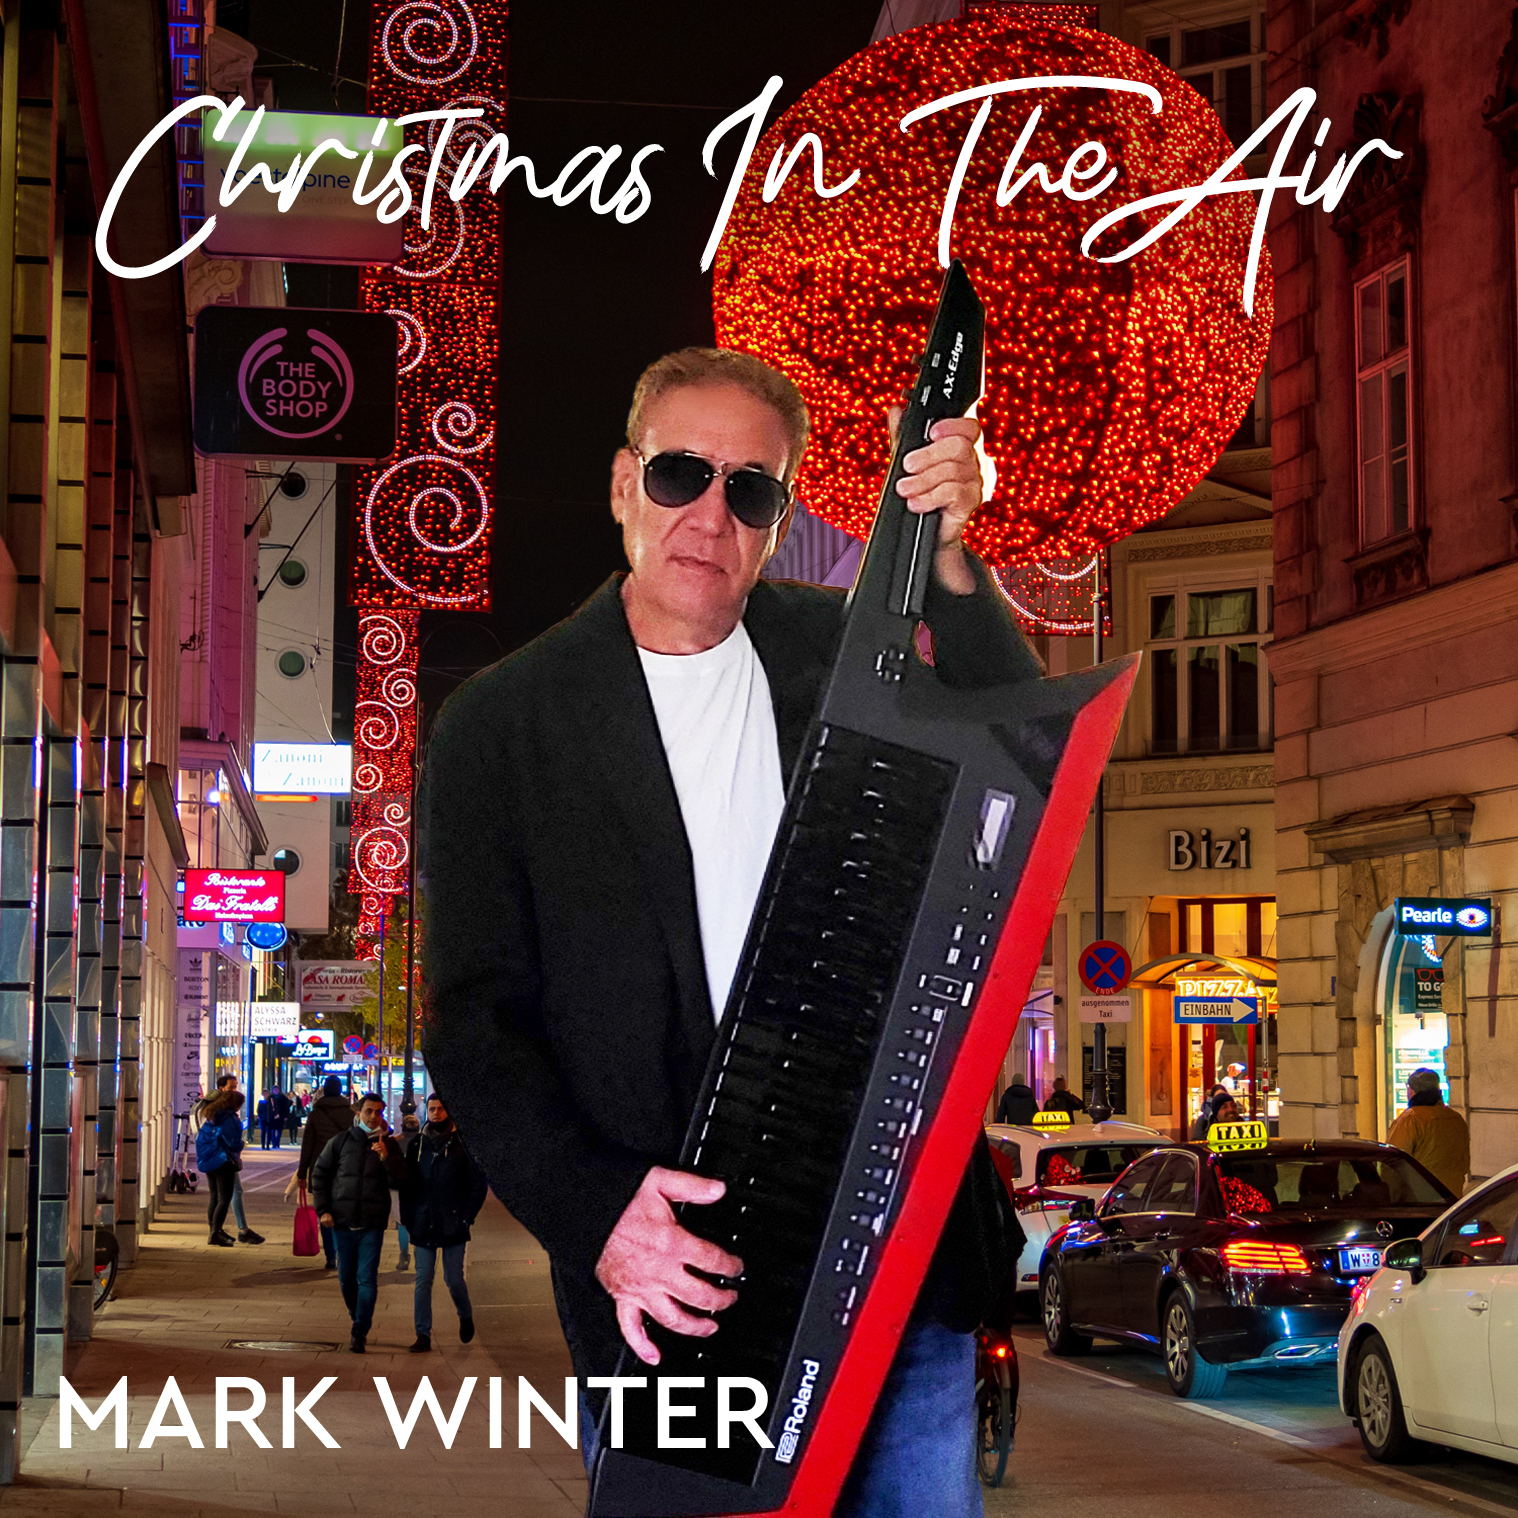 Wintertainment Announces the Release of Mark Winter's New Christmas Single, "Christmas In The Air"